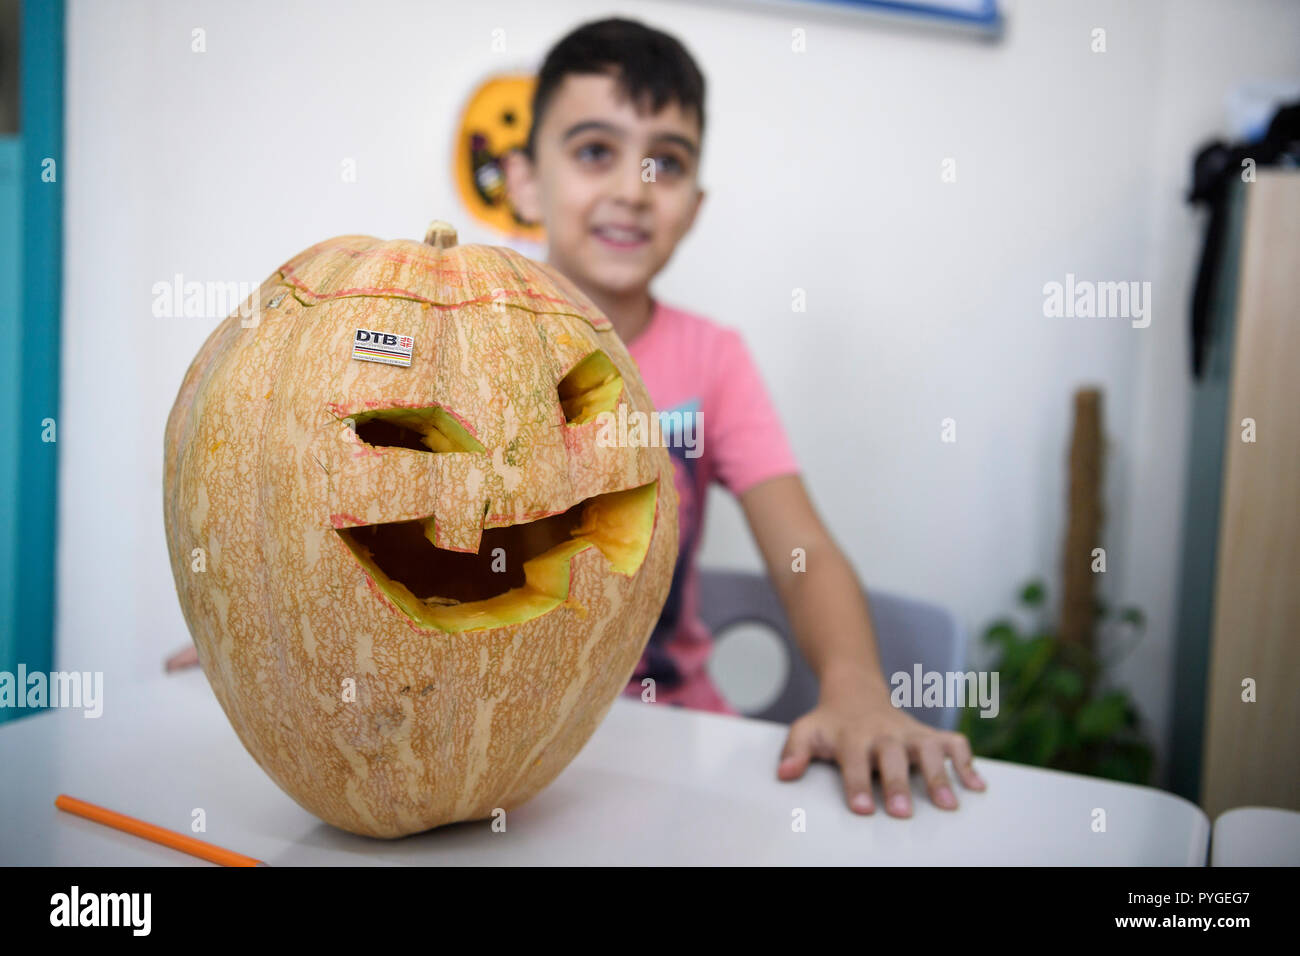 Pumpkin head with DTB pin. GES / Gymnastics / Gymnastics World Championships in Doha, Visit Turnteam Germany in the German School Doha, 28.10.2018 - GES / Artistic Gymnastics / Gymnastics World Championships: 28.10.2018 - | usage worldwide Stock Photo